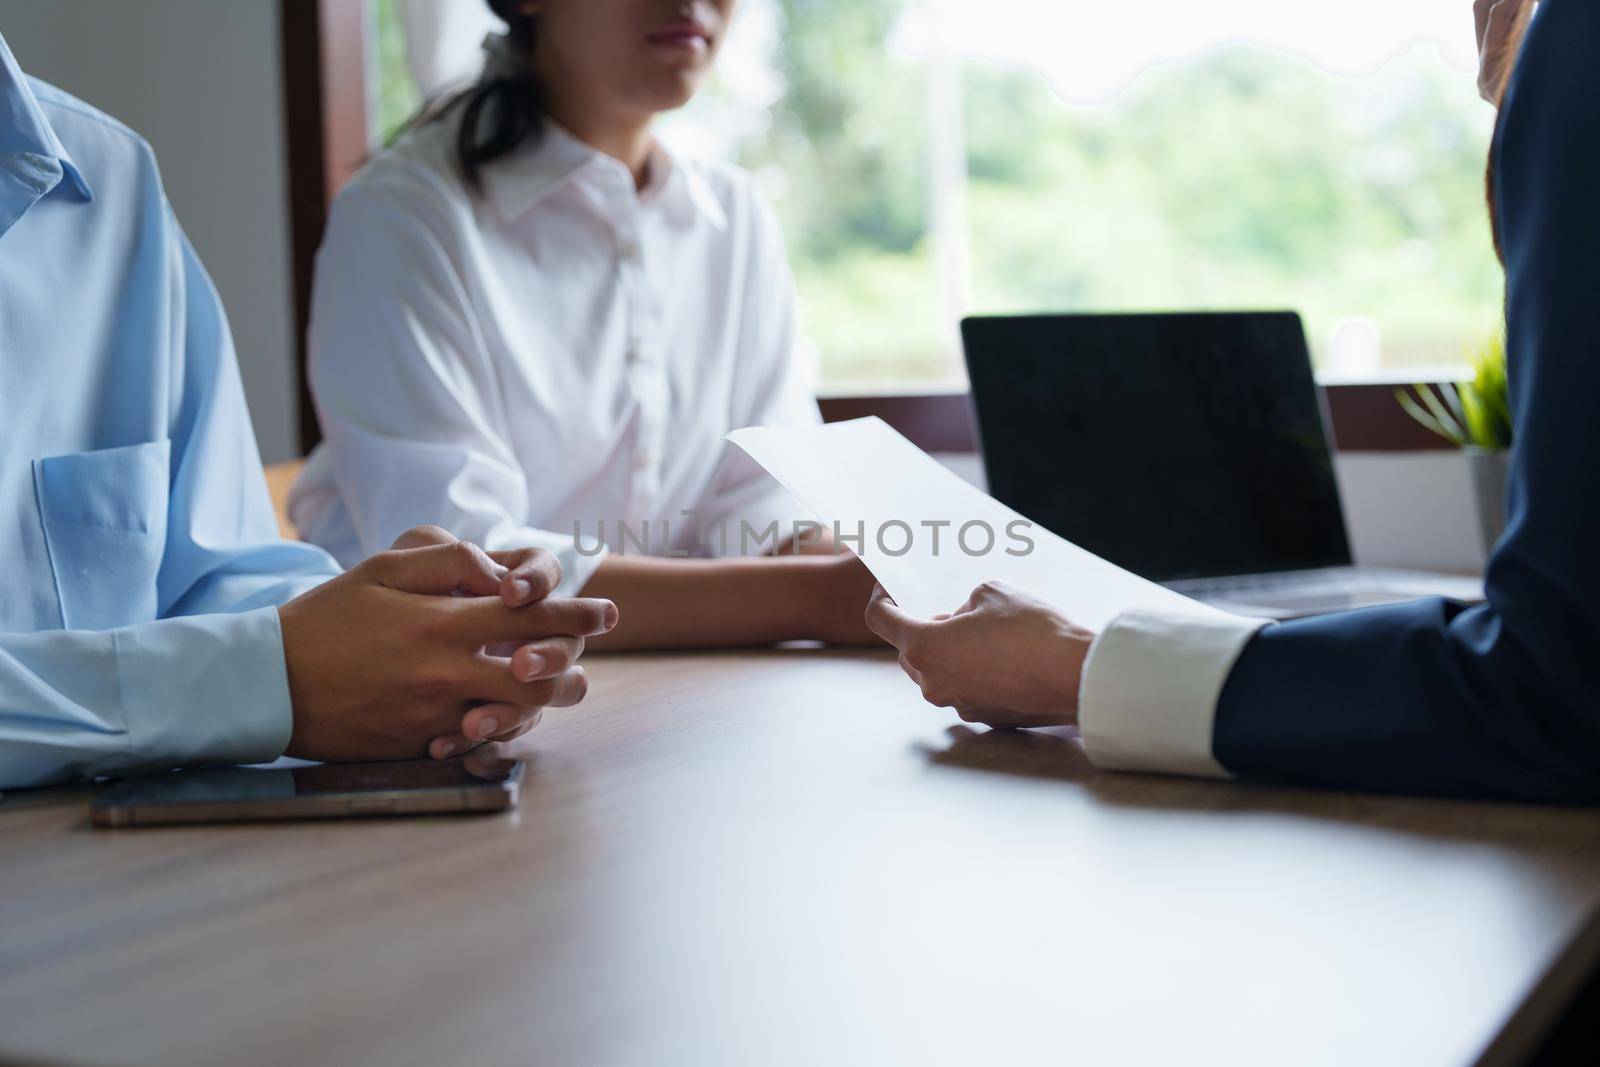 Couples consult with a representative to plan an insurance contract.